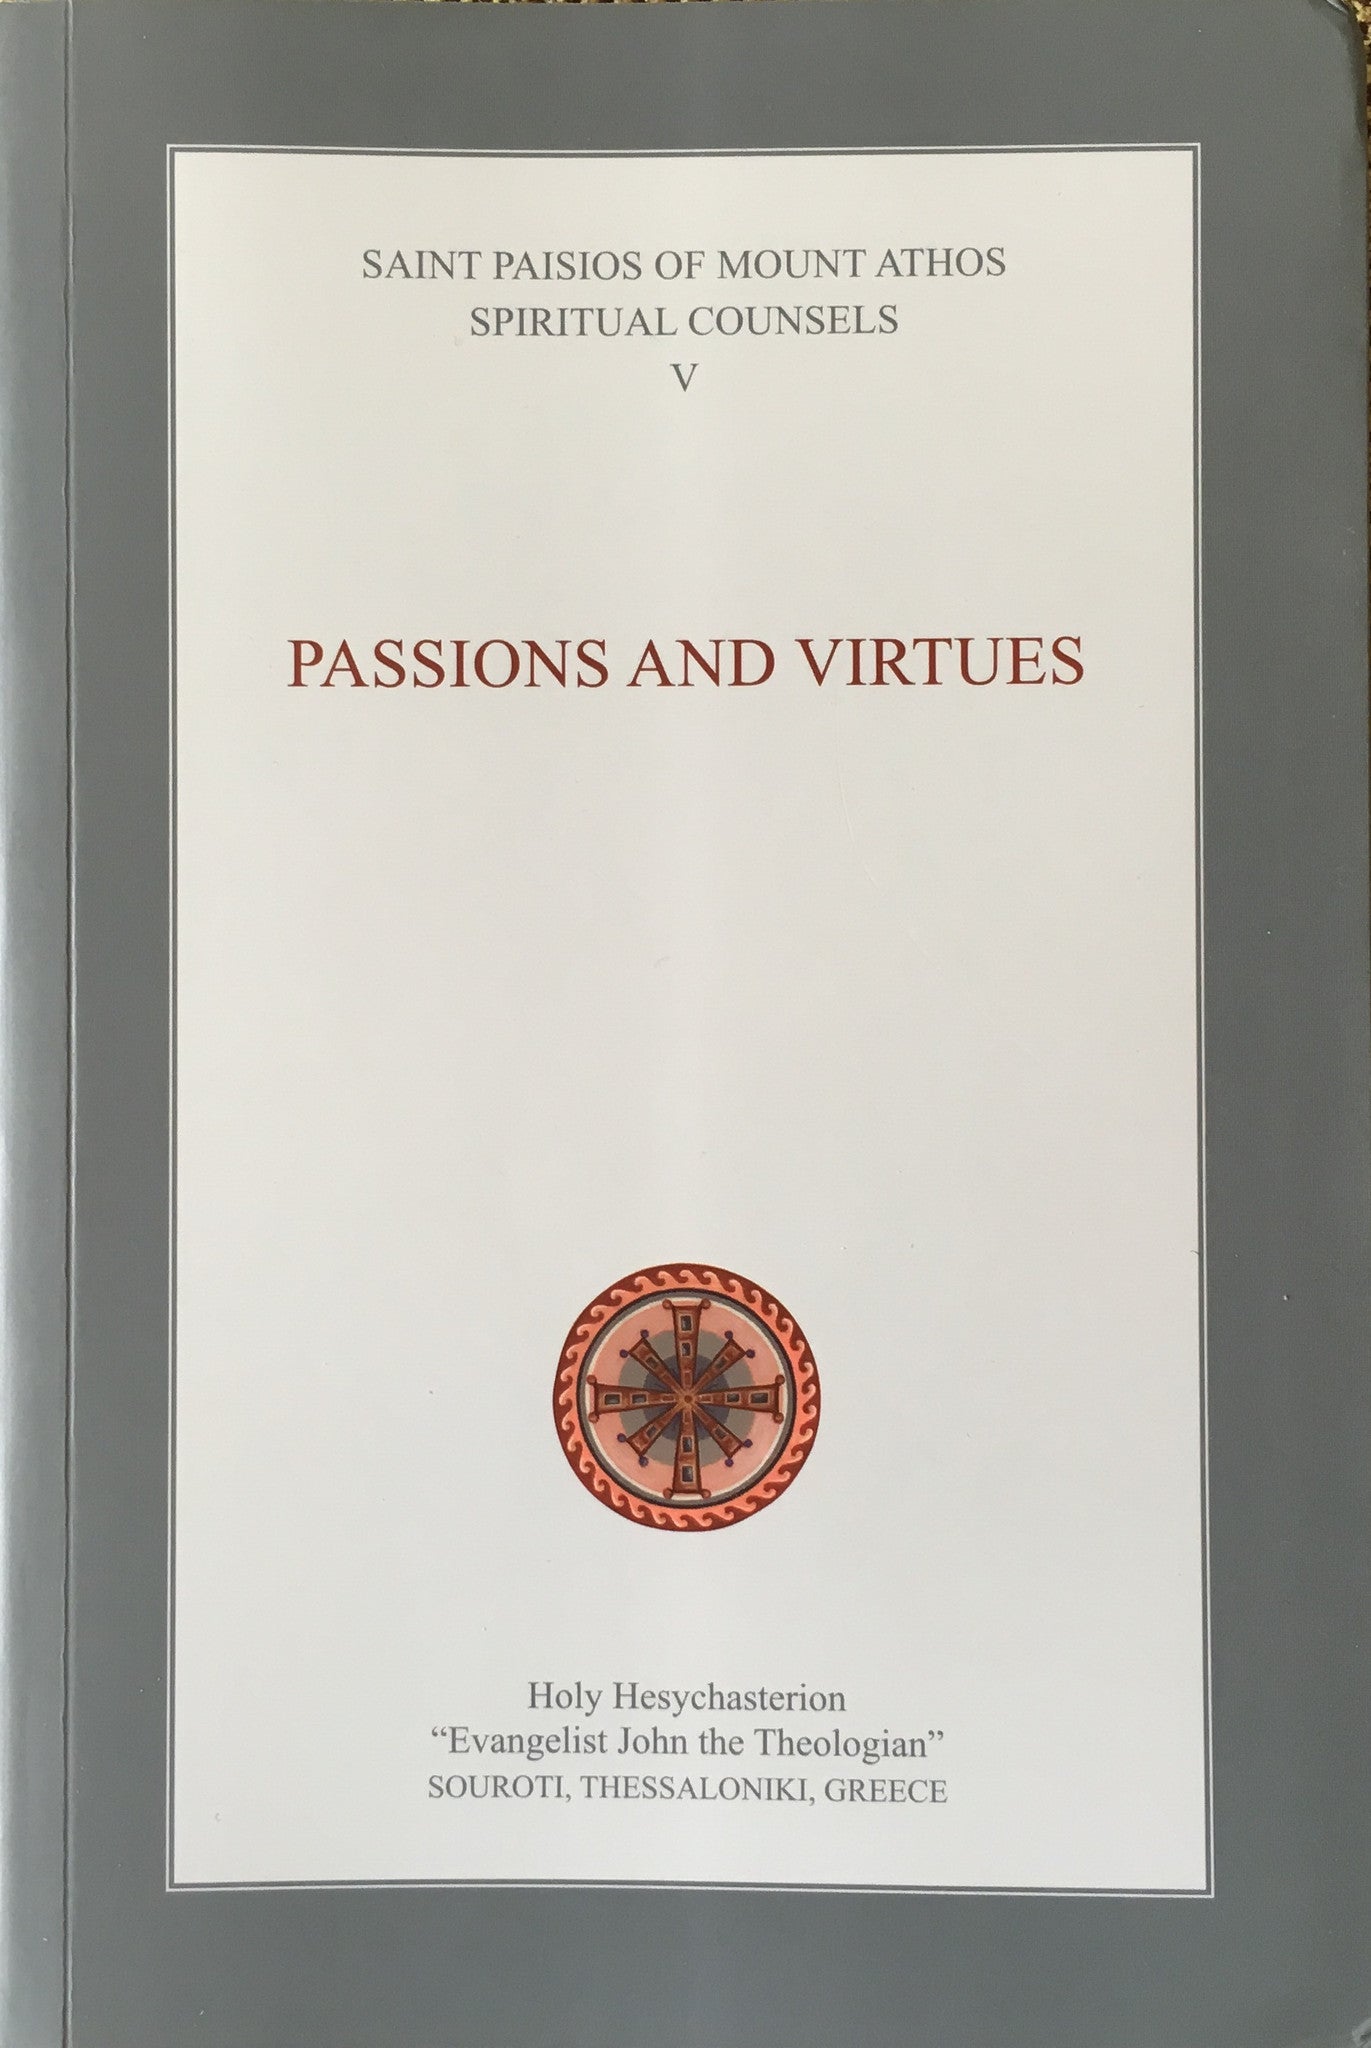 Spiritual Counsels Vol. 5: Passions and Virtues